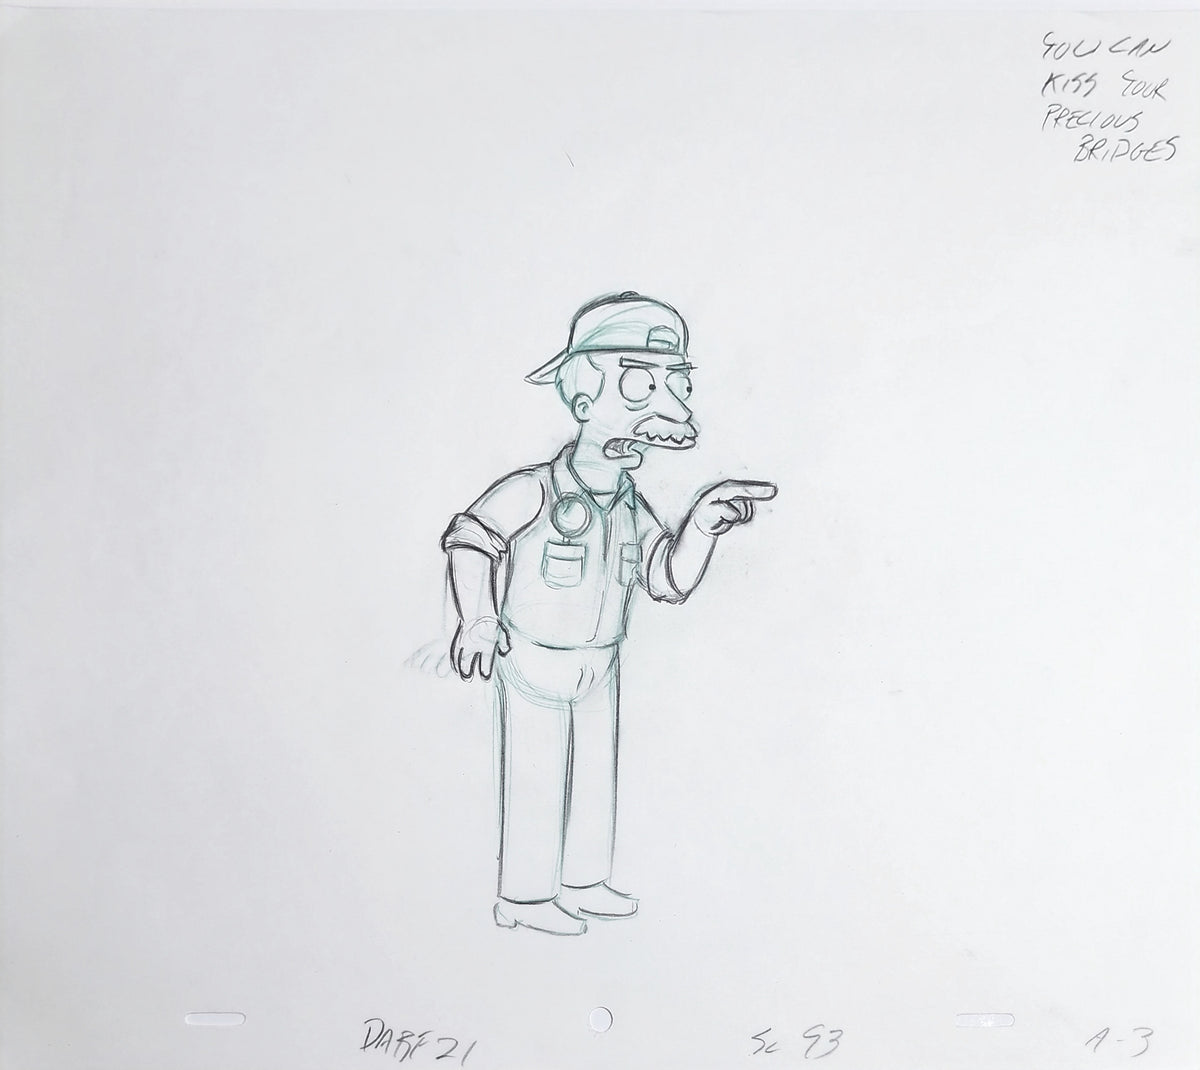 Simpsons Animation Production Cel Drawing - 3810